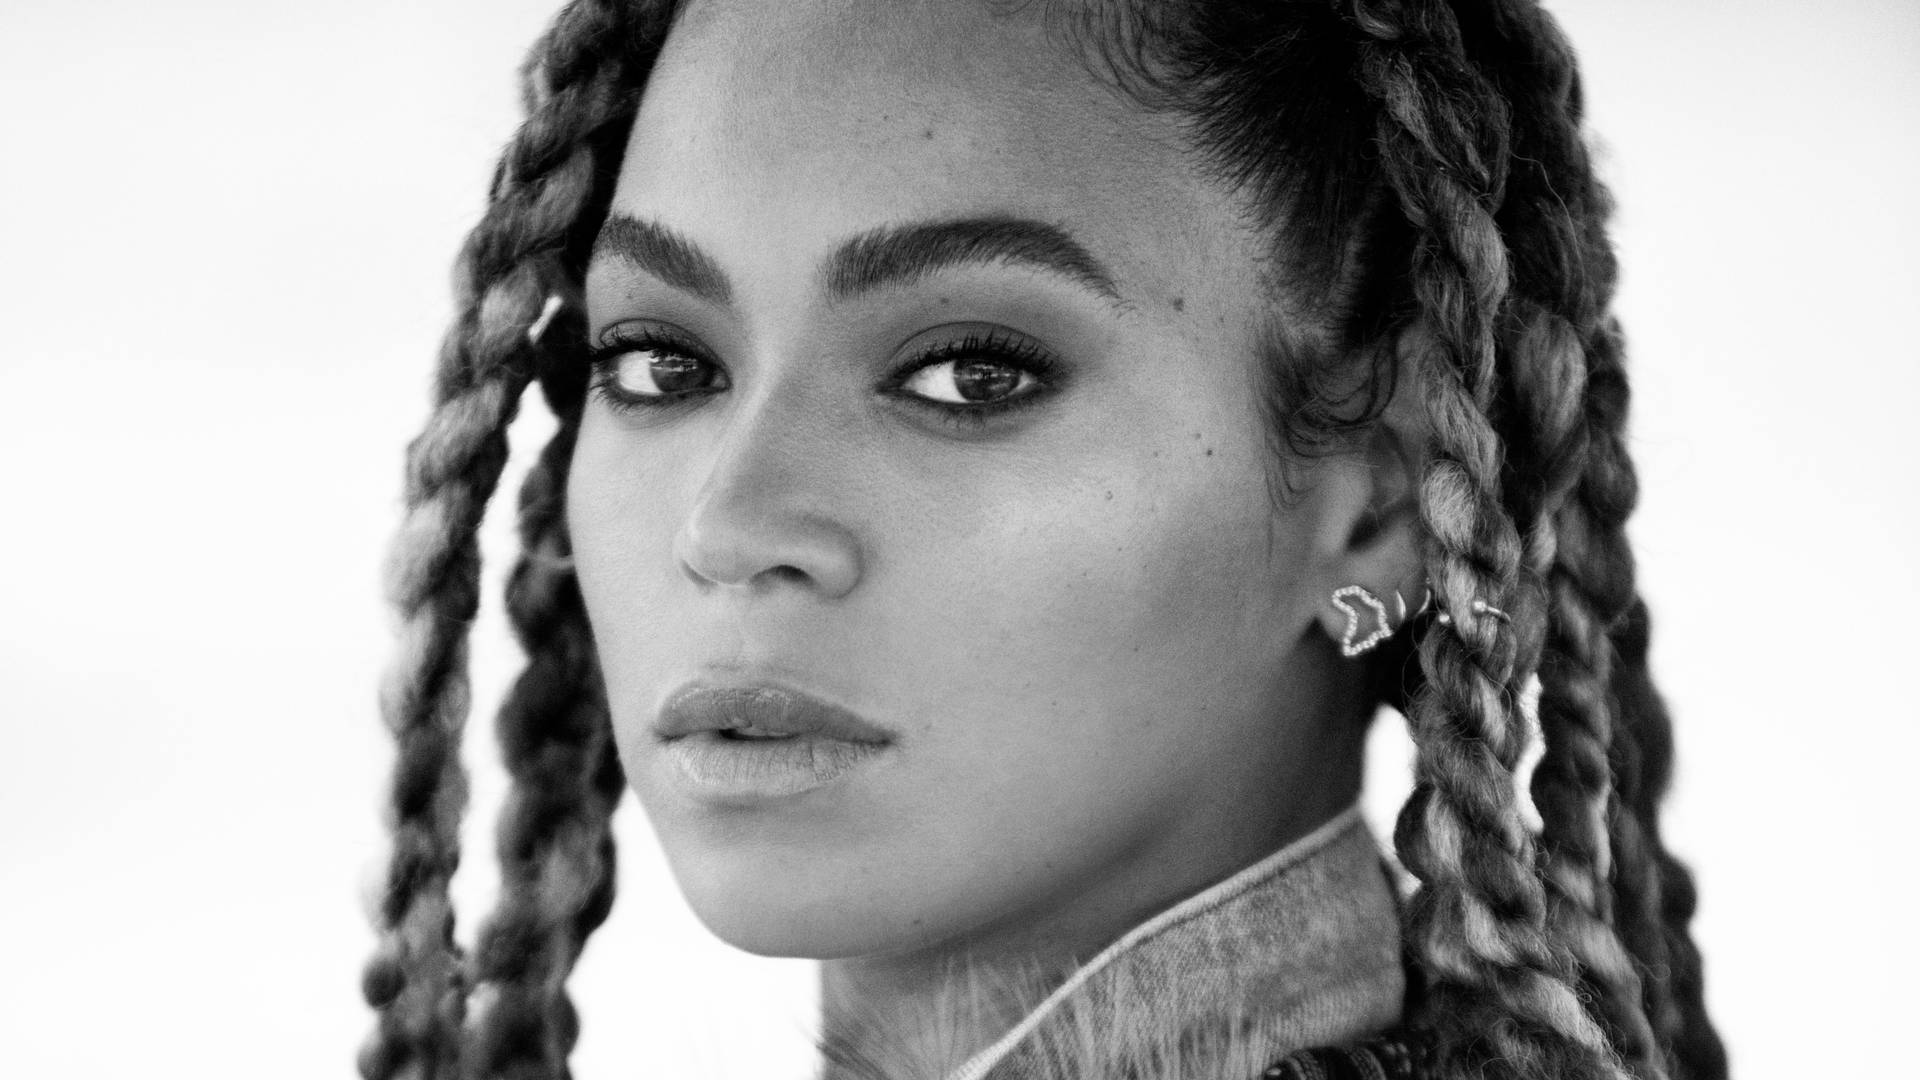 Beyonce wears her signature braids with statement earrings Wallpaper